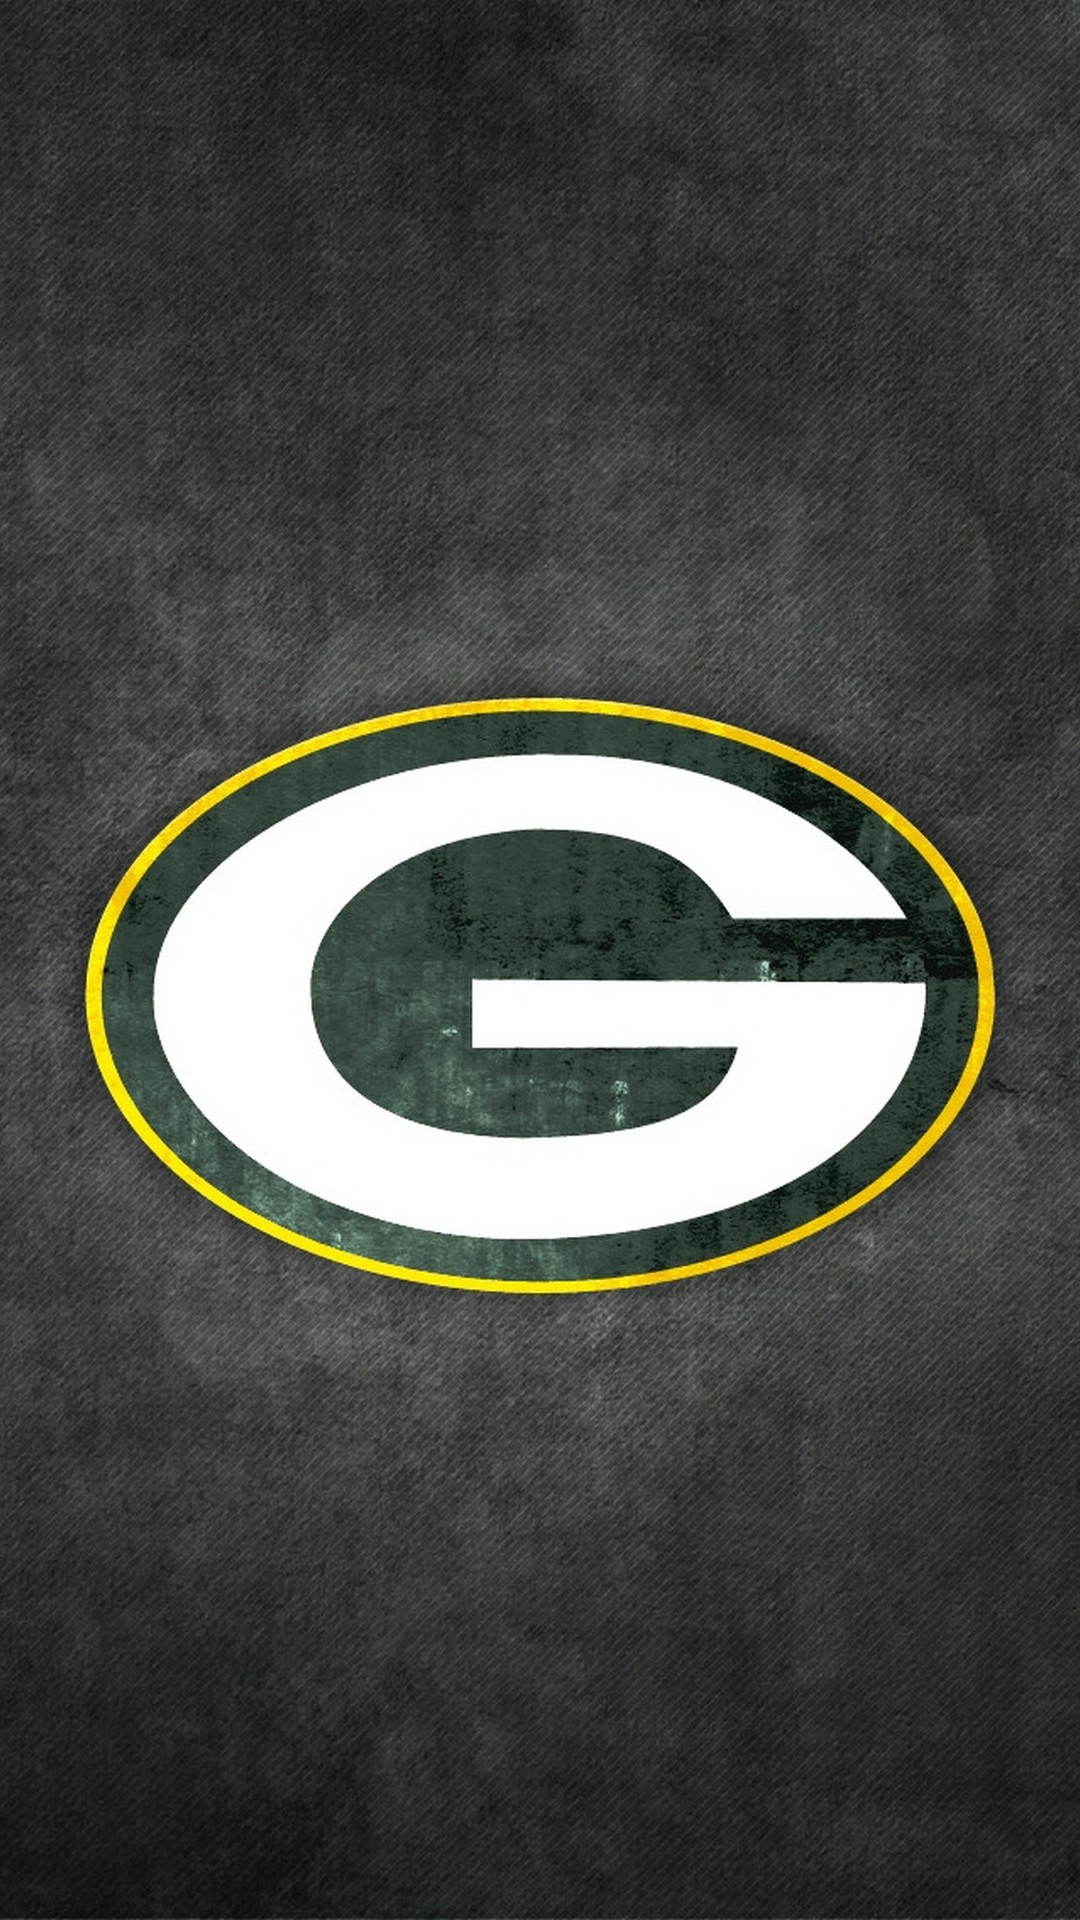 Green Bay Packers iPhone 6s Plus Wallpaper with high-resolution 1080x1920 pixel. Download and set as wallpaper for Apple iPhone X, XS Max, XR, 8, 7, 6, SE, iPad, Android